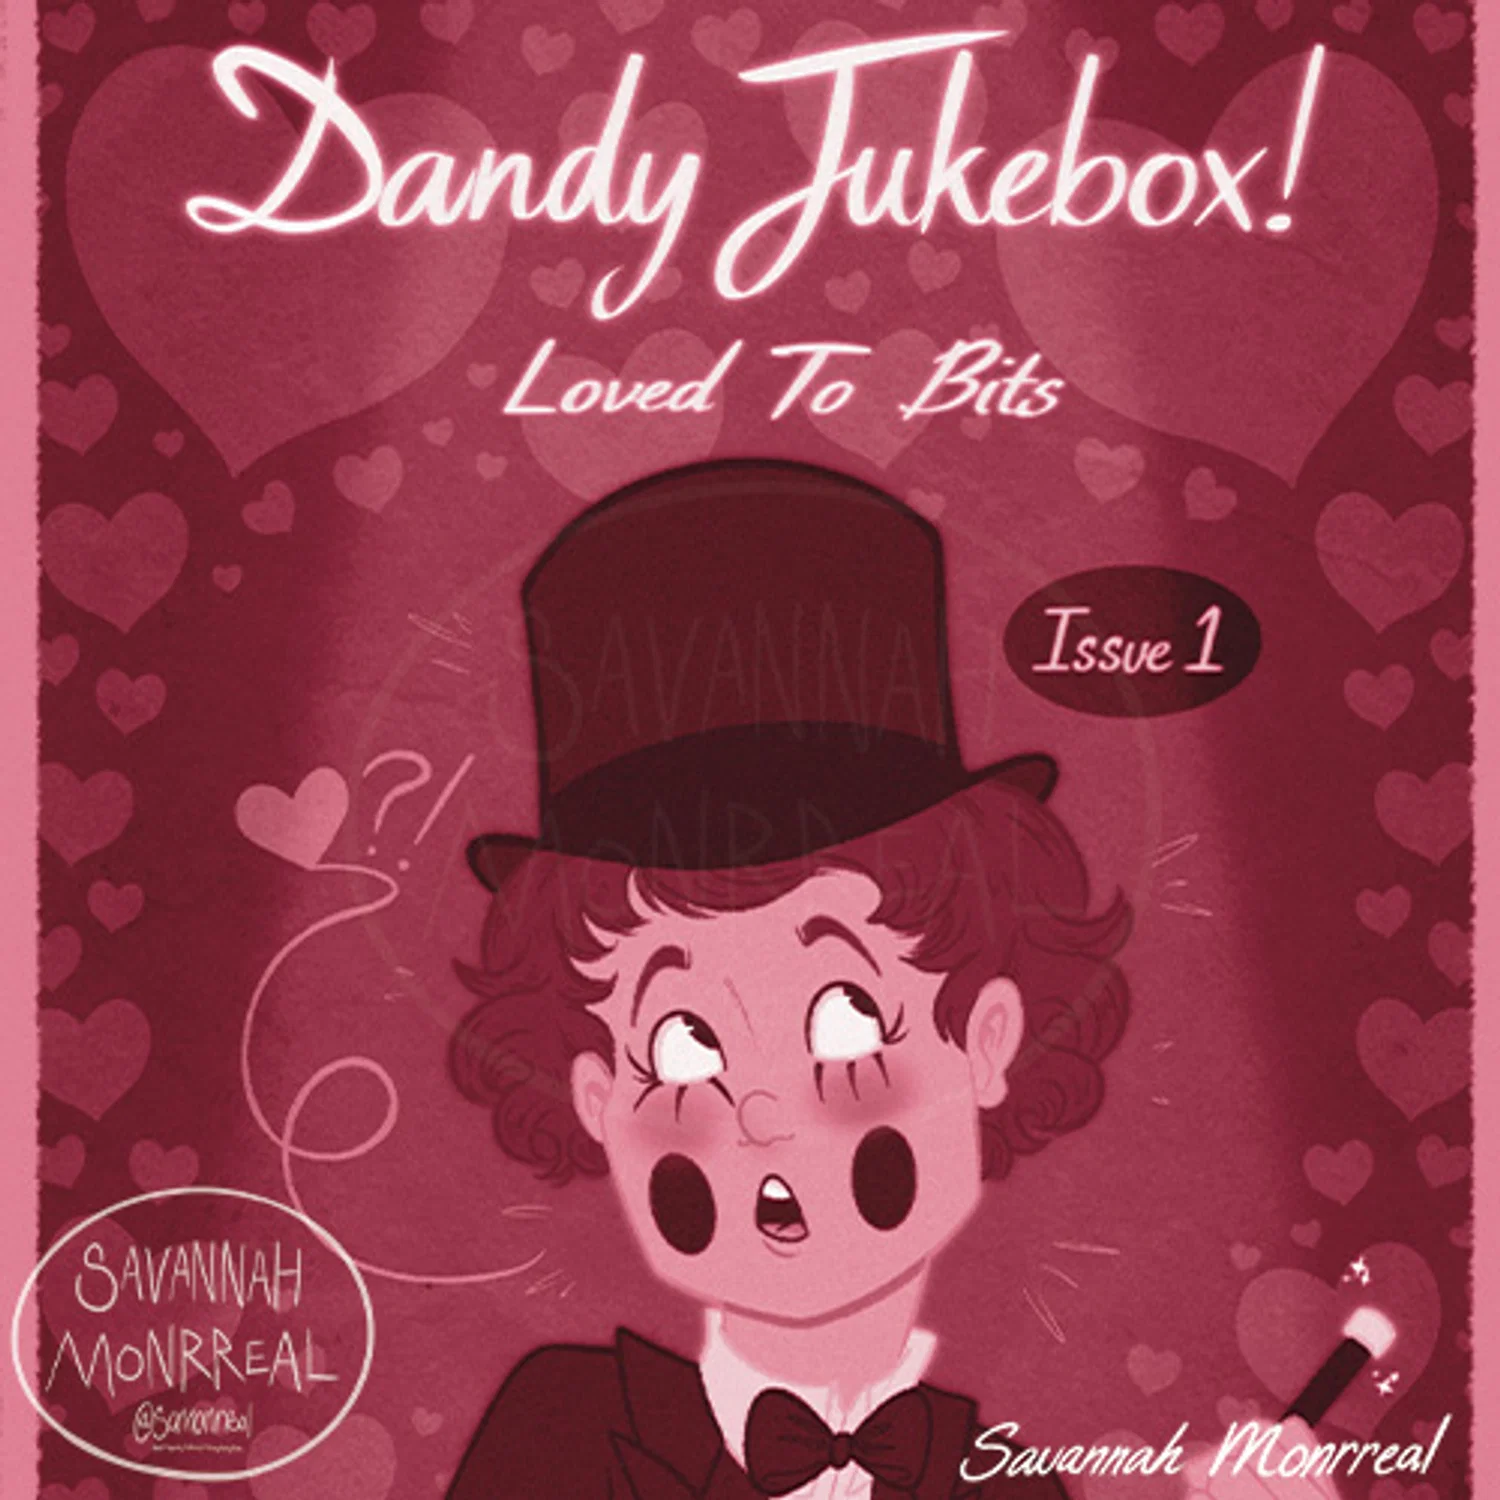 Comic cover of protagonist wearing black tuxedo, a top hat, and is holding a prop cane in his hand. He has curly hair, black circles drawn on his cheeks, lines drawn under his eyes. His eyes look up at the white cursive text which say "Dandy Jukebox" and underneath that "Loved To Bits." There is a dark speech bubble that has white text which reads "Issue 1." At the bottom of the page, white cursive text reads "Savannah Monrreal." There is a light border on the left and right side of the page and within it is the protagonist with a bunch of hearts scattered in the background. The cover is monochrome with a pink hue overlayed. There is a watermark in the corner that says "Savannah Monrreal @samonrreal" 